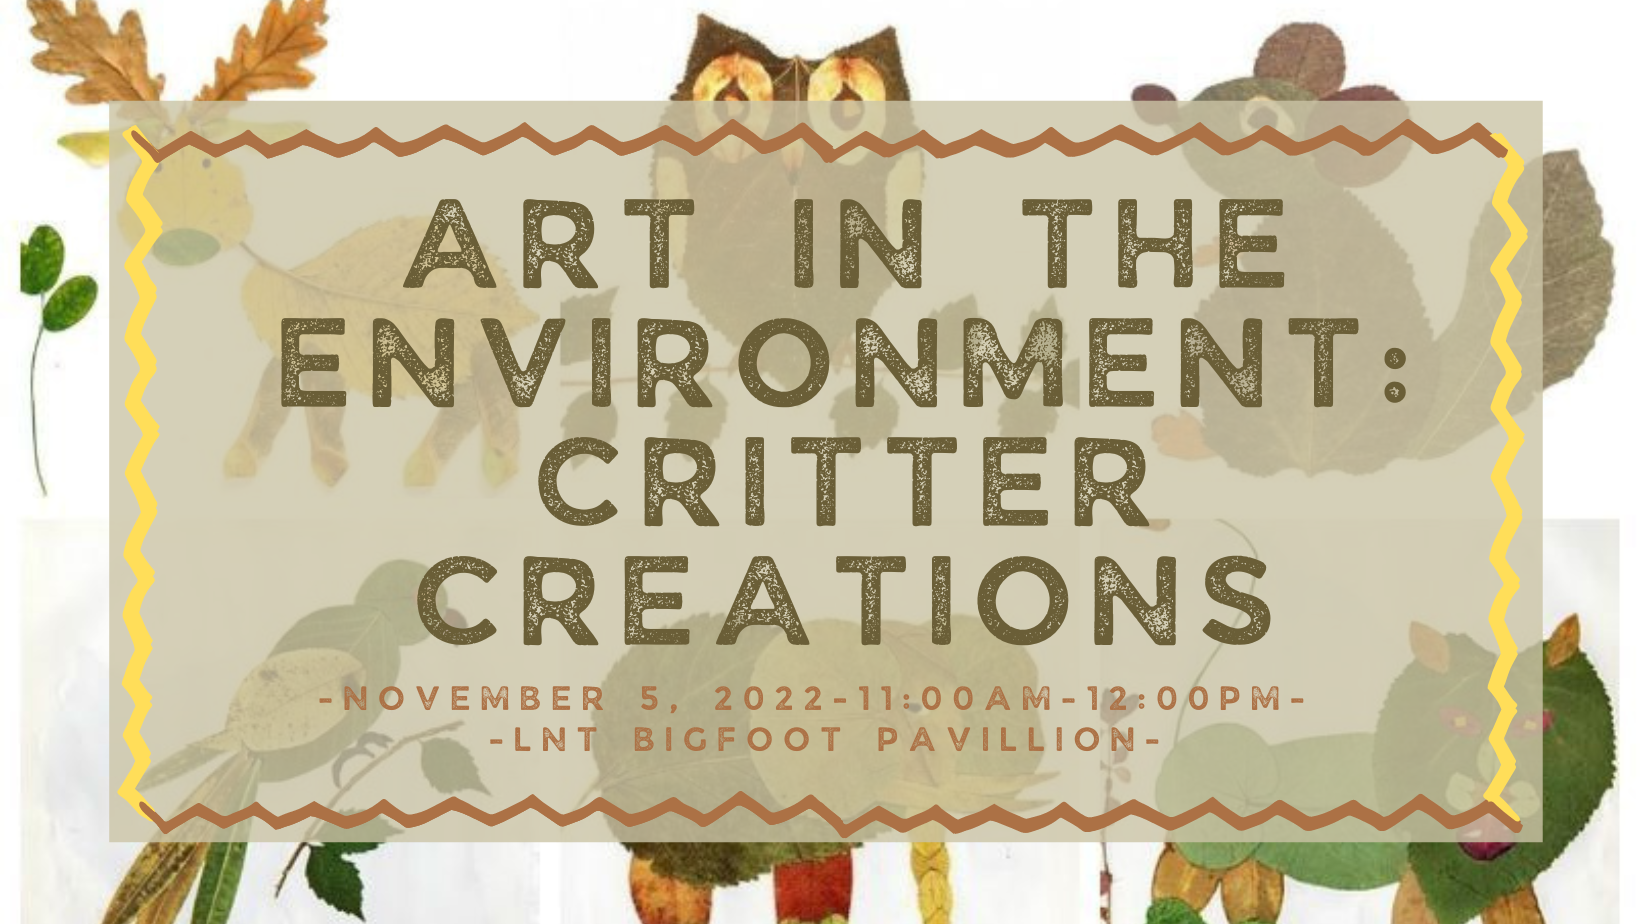 Arts in the Environment: Critter Creations